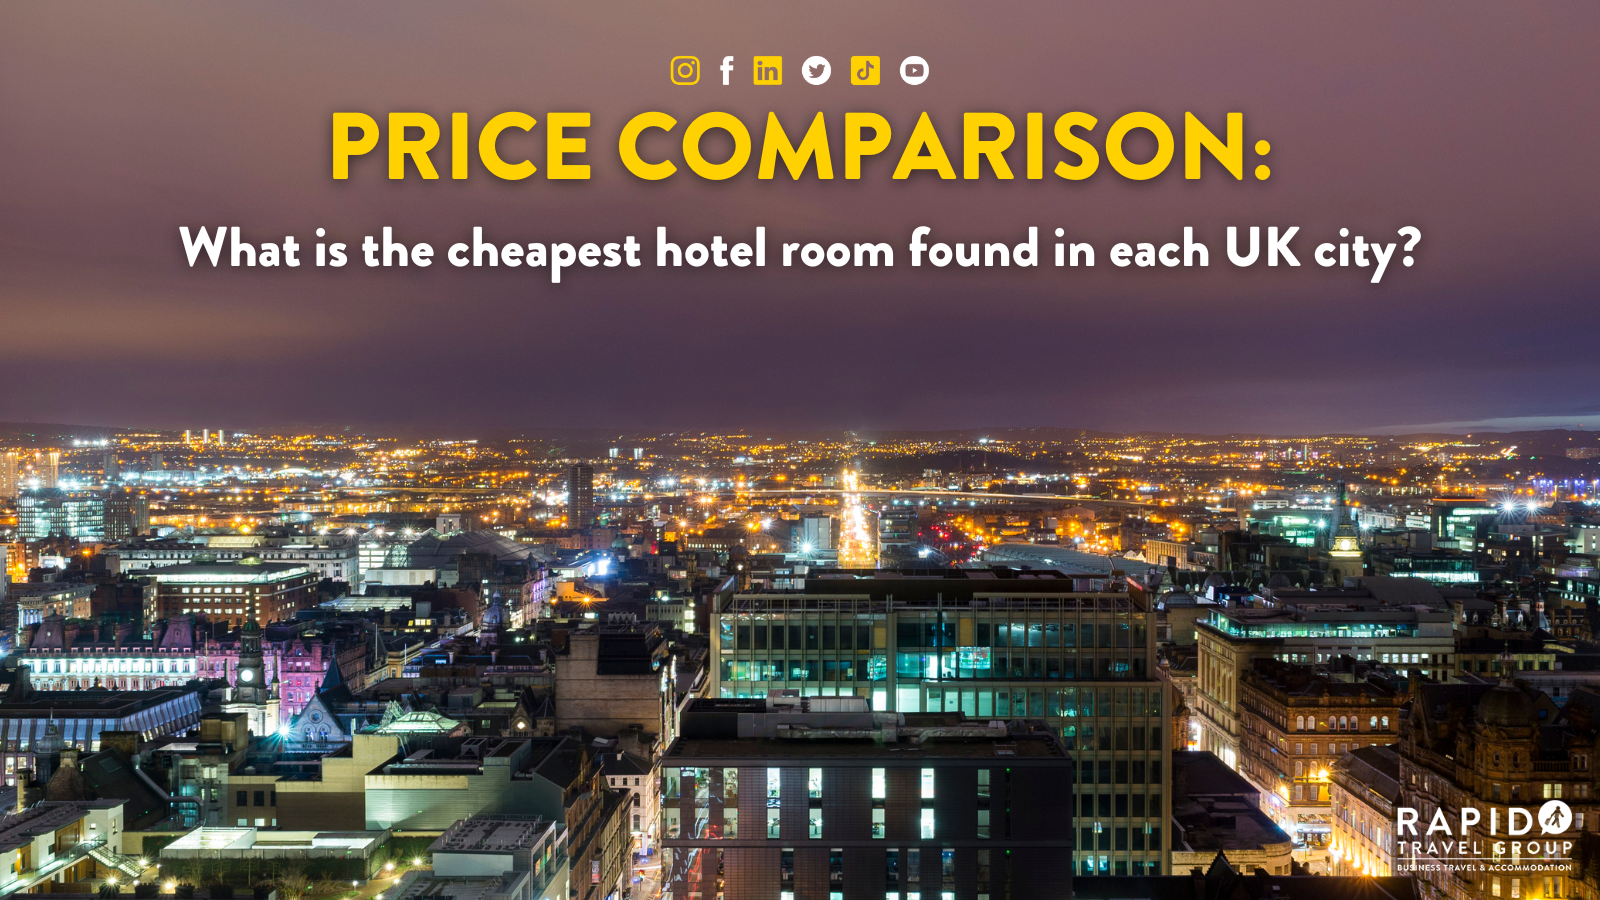 Price Comparison: What is the cheapest hotel room found in each UK city?